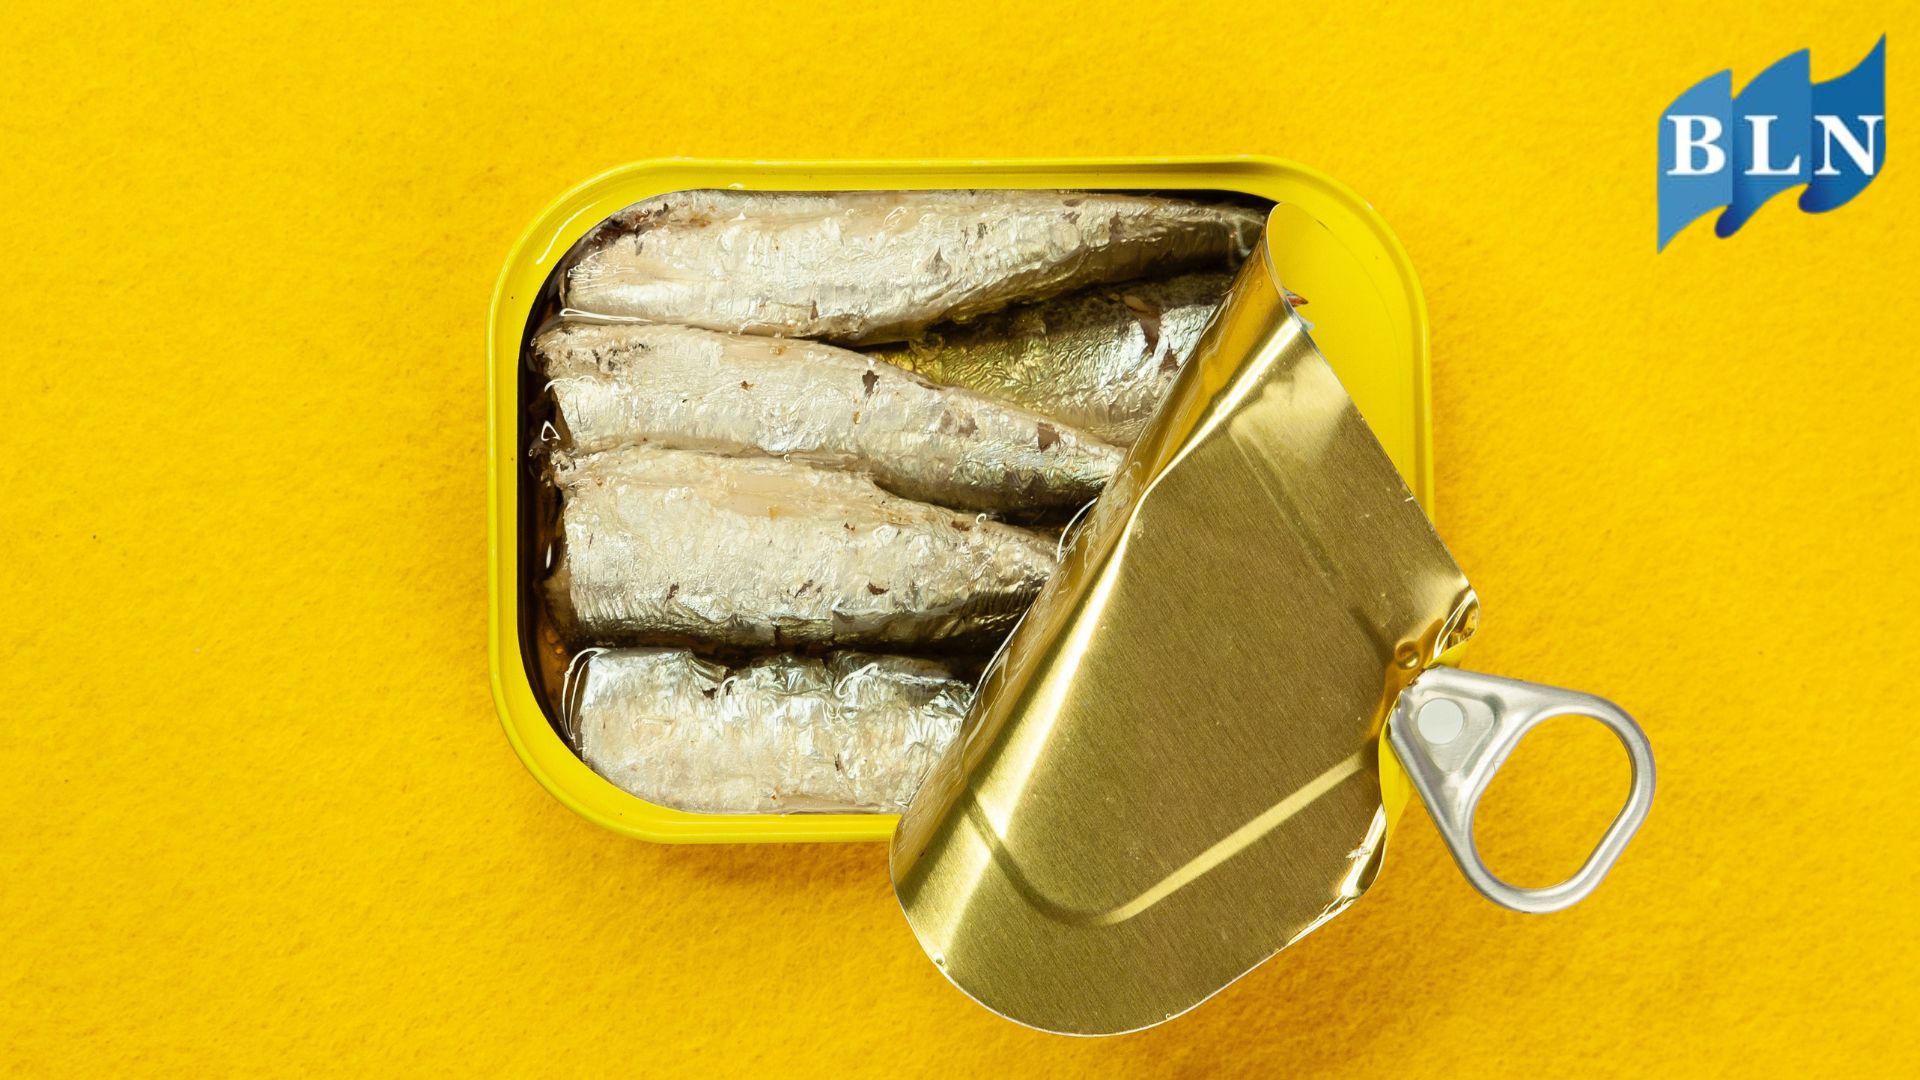 Sardines, Small Fish with Big Nutrition